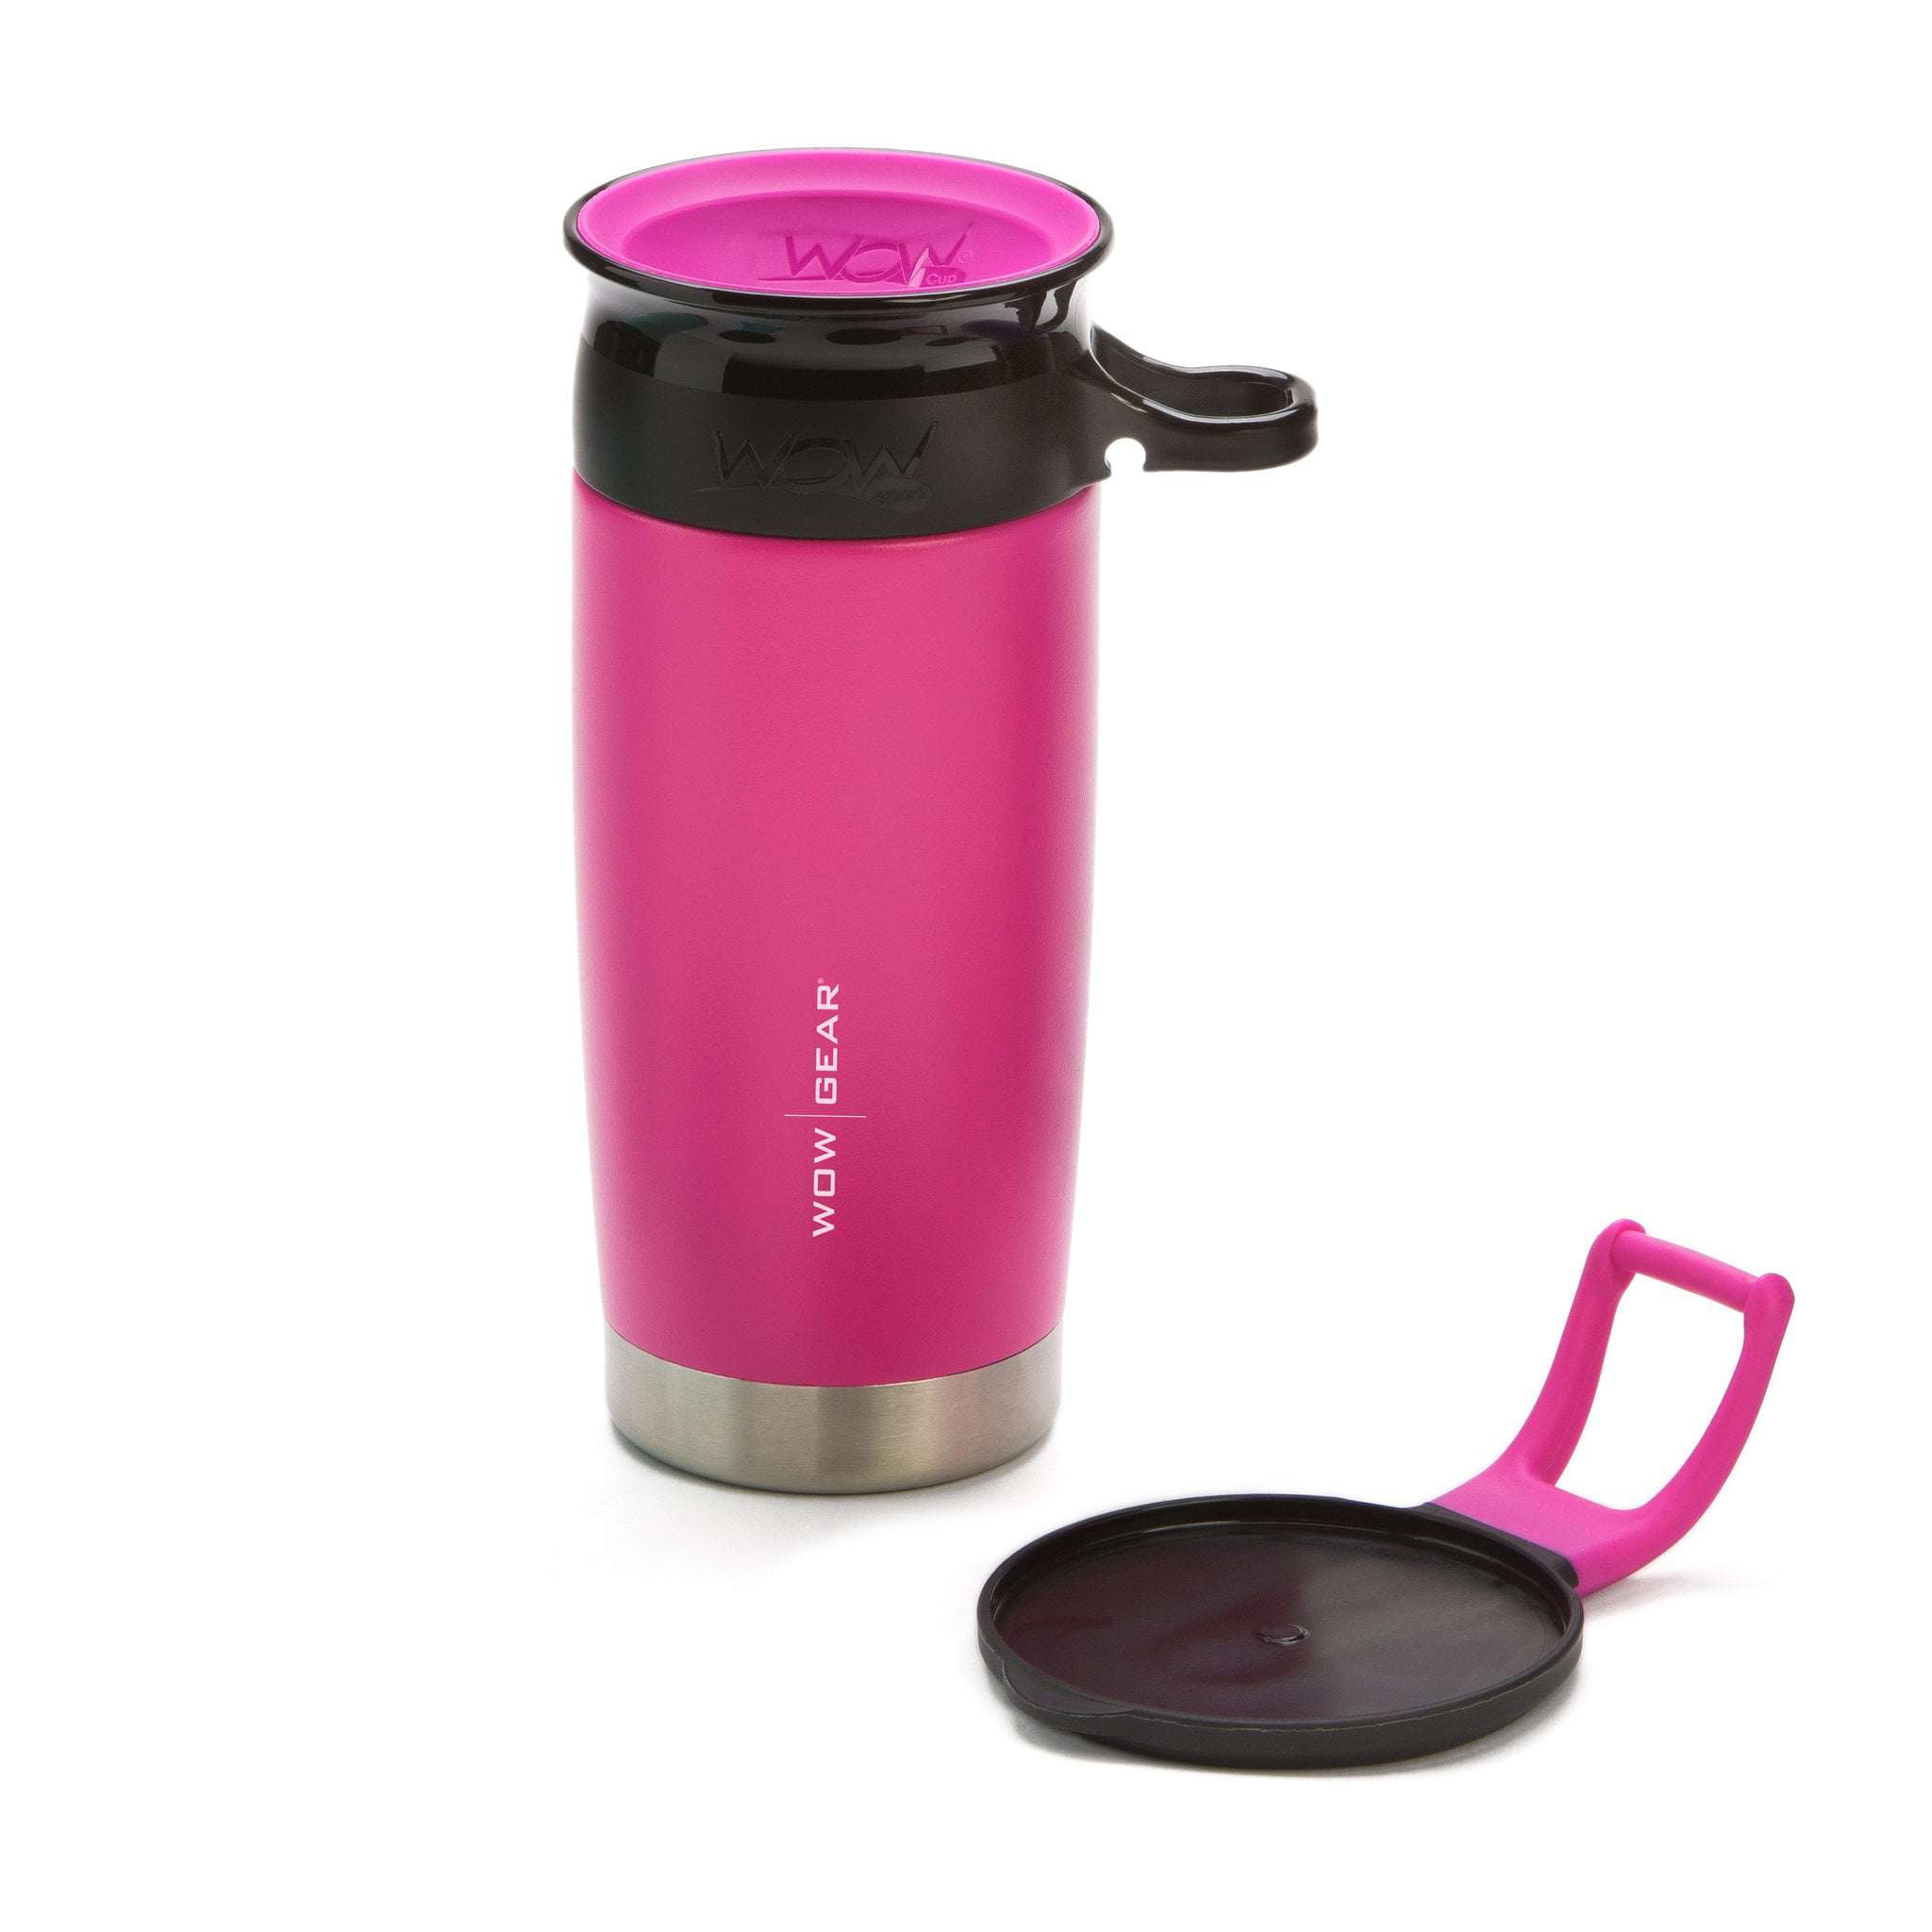 Wow Gear Stainless Insulated 360 Sports Bottle - Purple, 13.5 oz / 400 ml